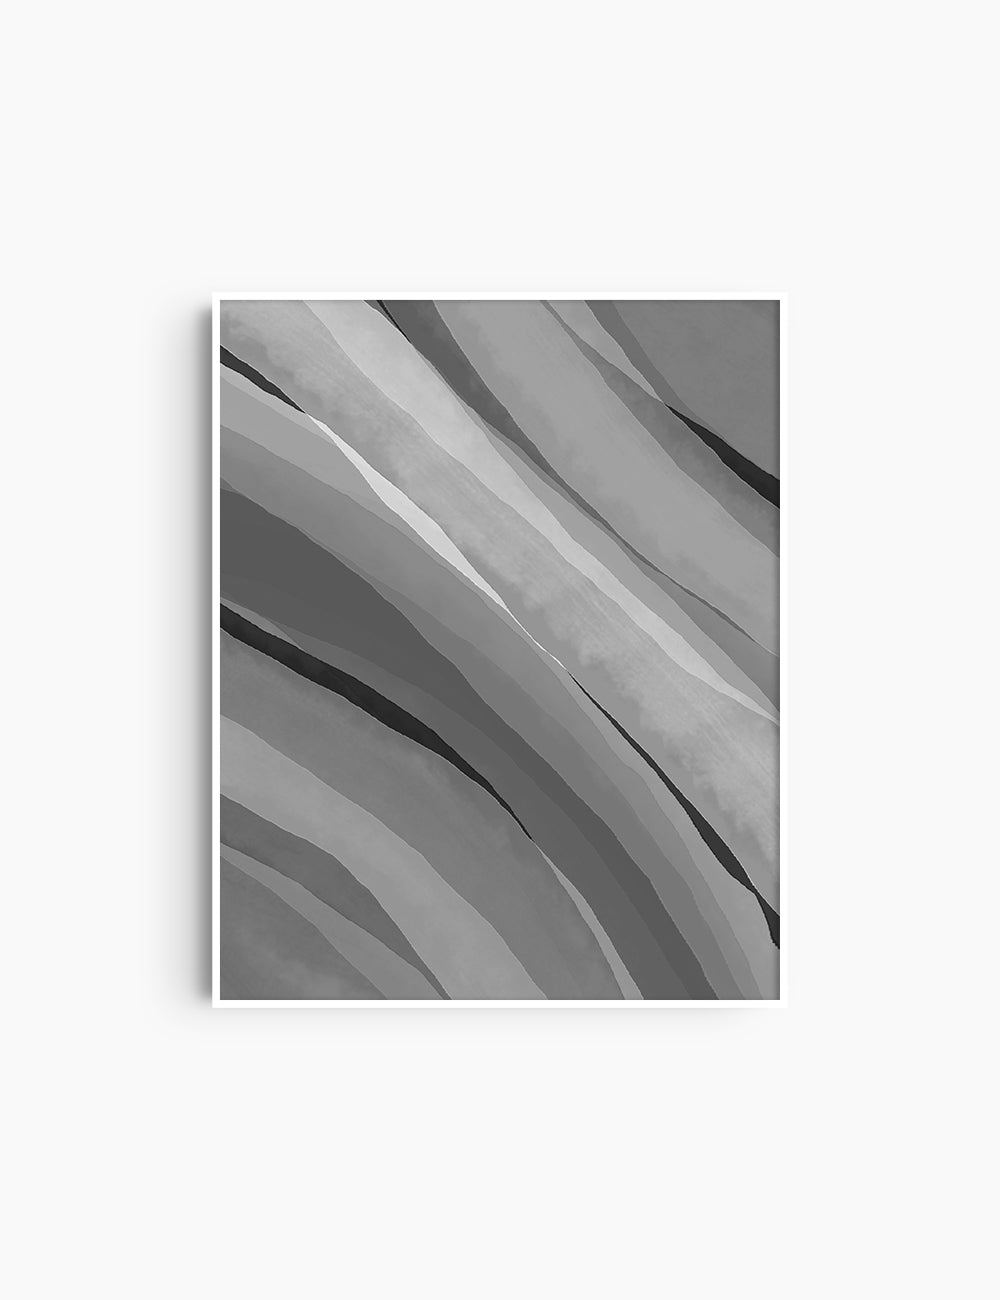 WATERCOLOR ABSTRACT. Shades of Grey. Aesthetic. Minimalist. Abstract Watercolor Painting. Printable Wall Art. - PAPER MOON Art & Design